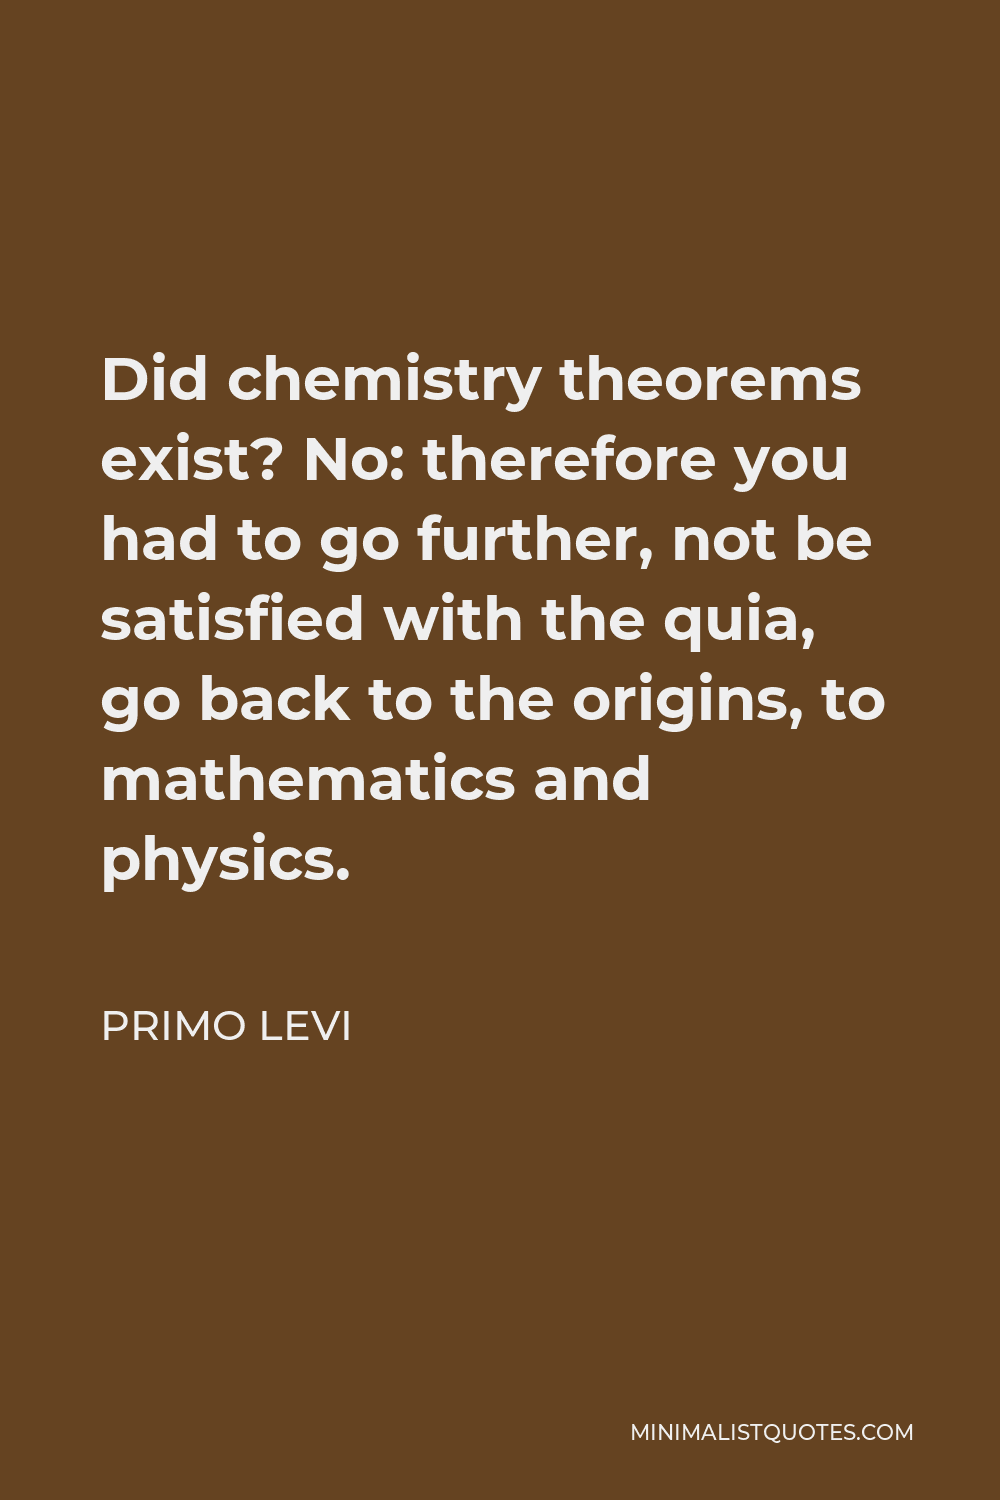 Primo Levi Quote - Did chemistry theorems exist? No: therefore you had to go further, not be satisfied with the quia, go back to the origins, to mathematics and physics.